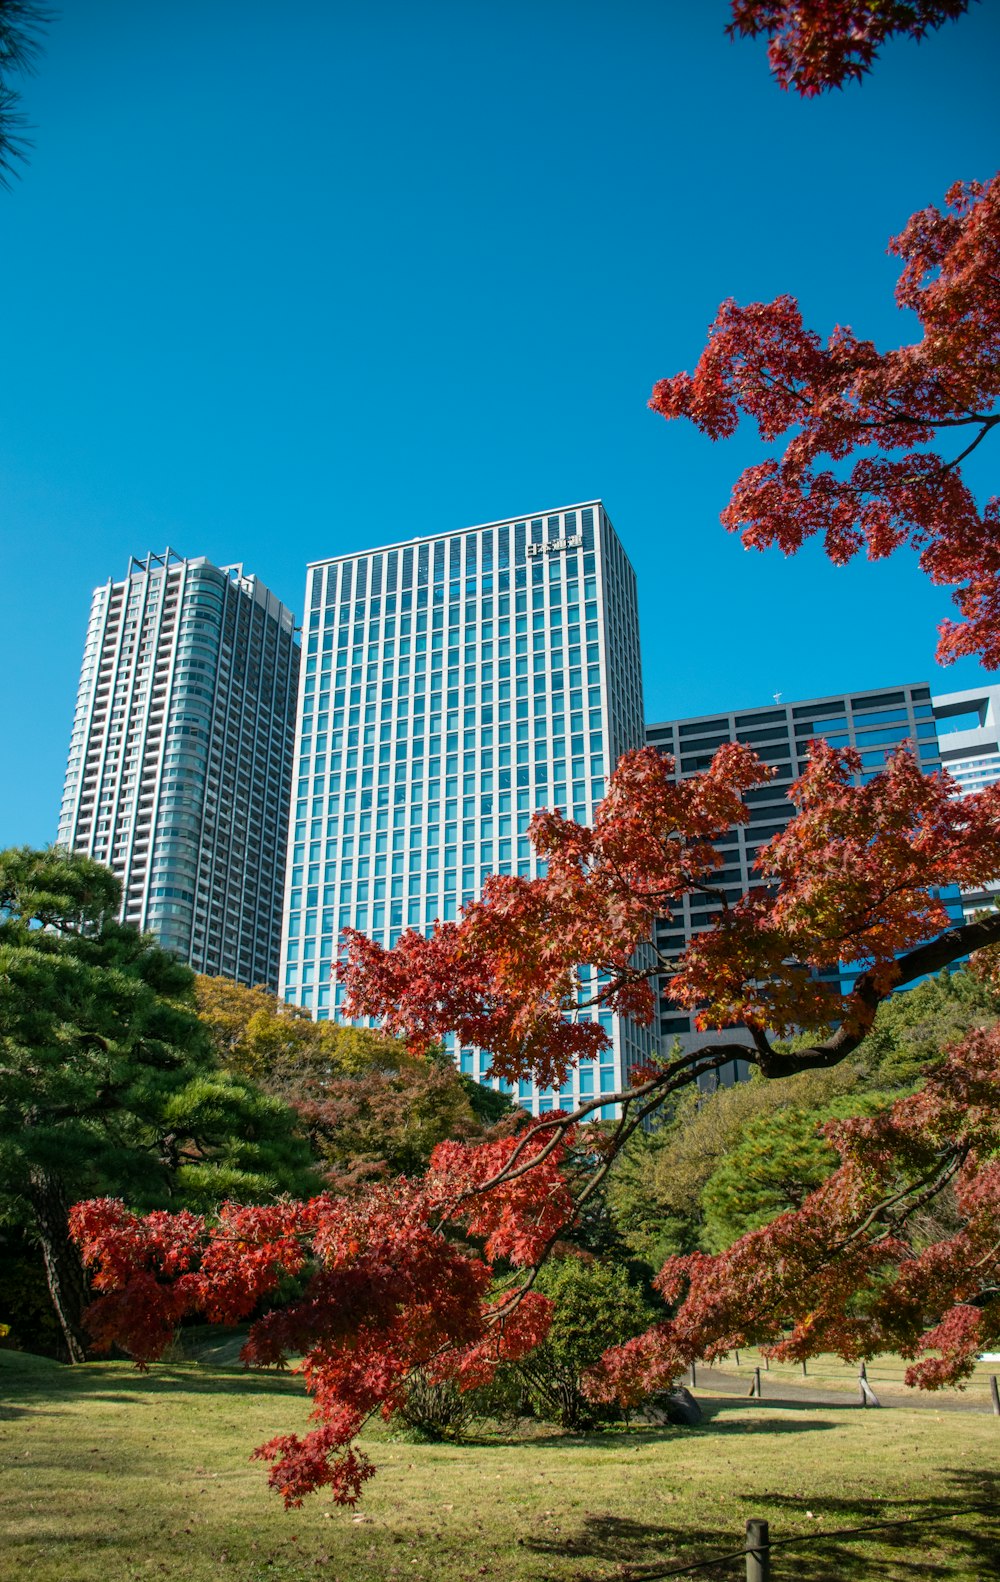 photo of city building and trees